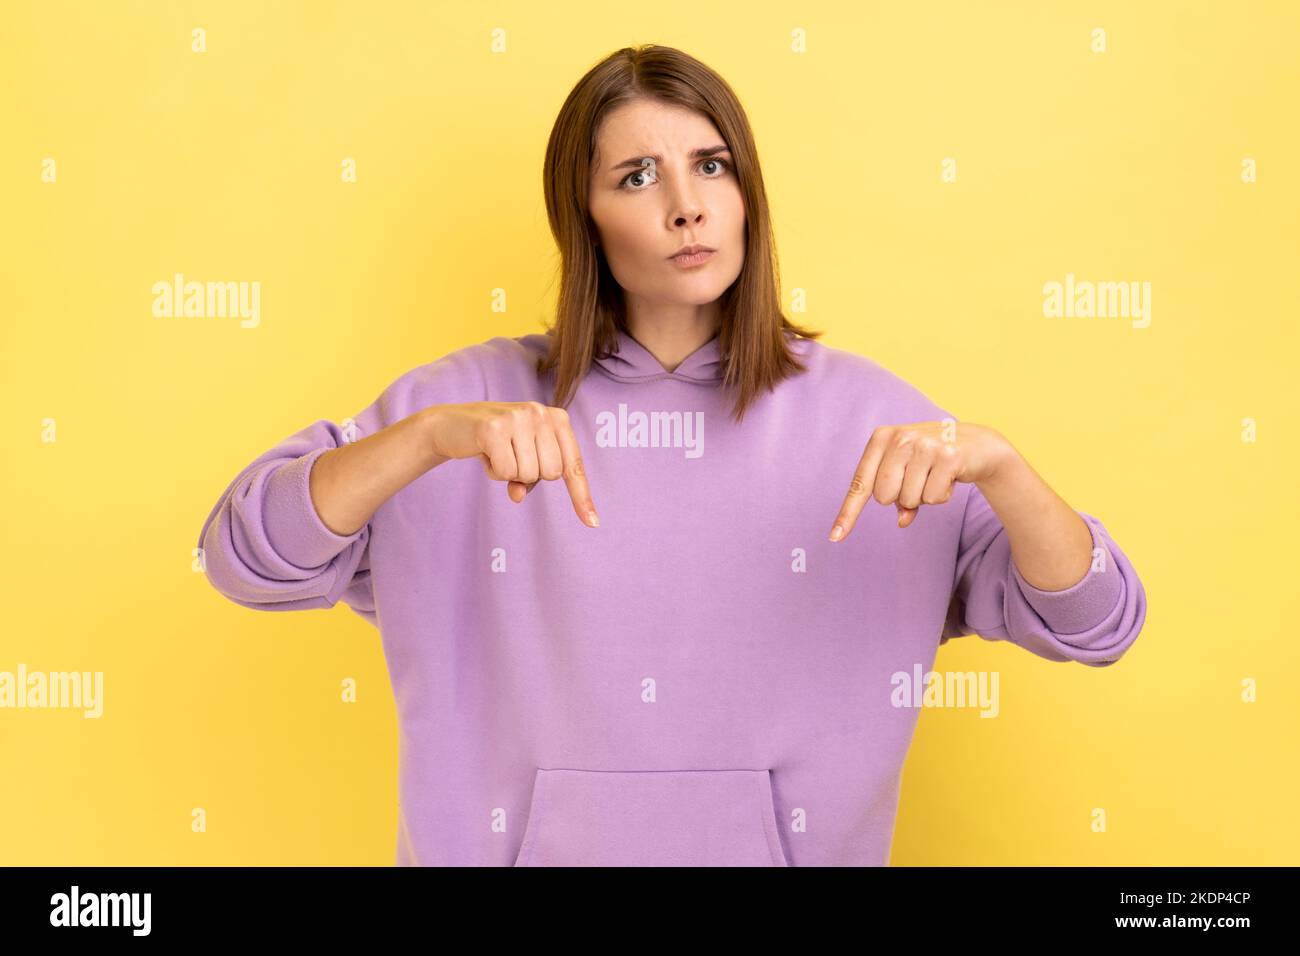 Portrait of serious strict confident bossy woman pointing fingers down, asking to act here and now immediately, wearing purple hoodie. Indoor studio shot isolated on yellow background. Stock Photo